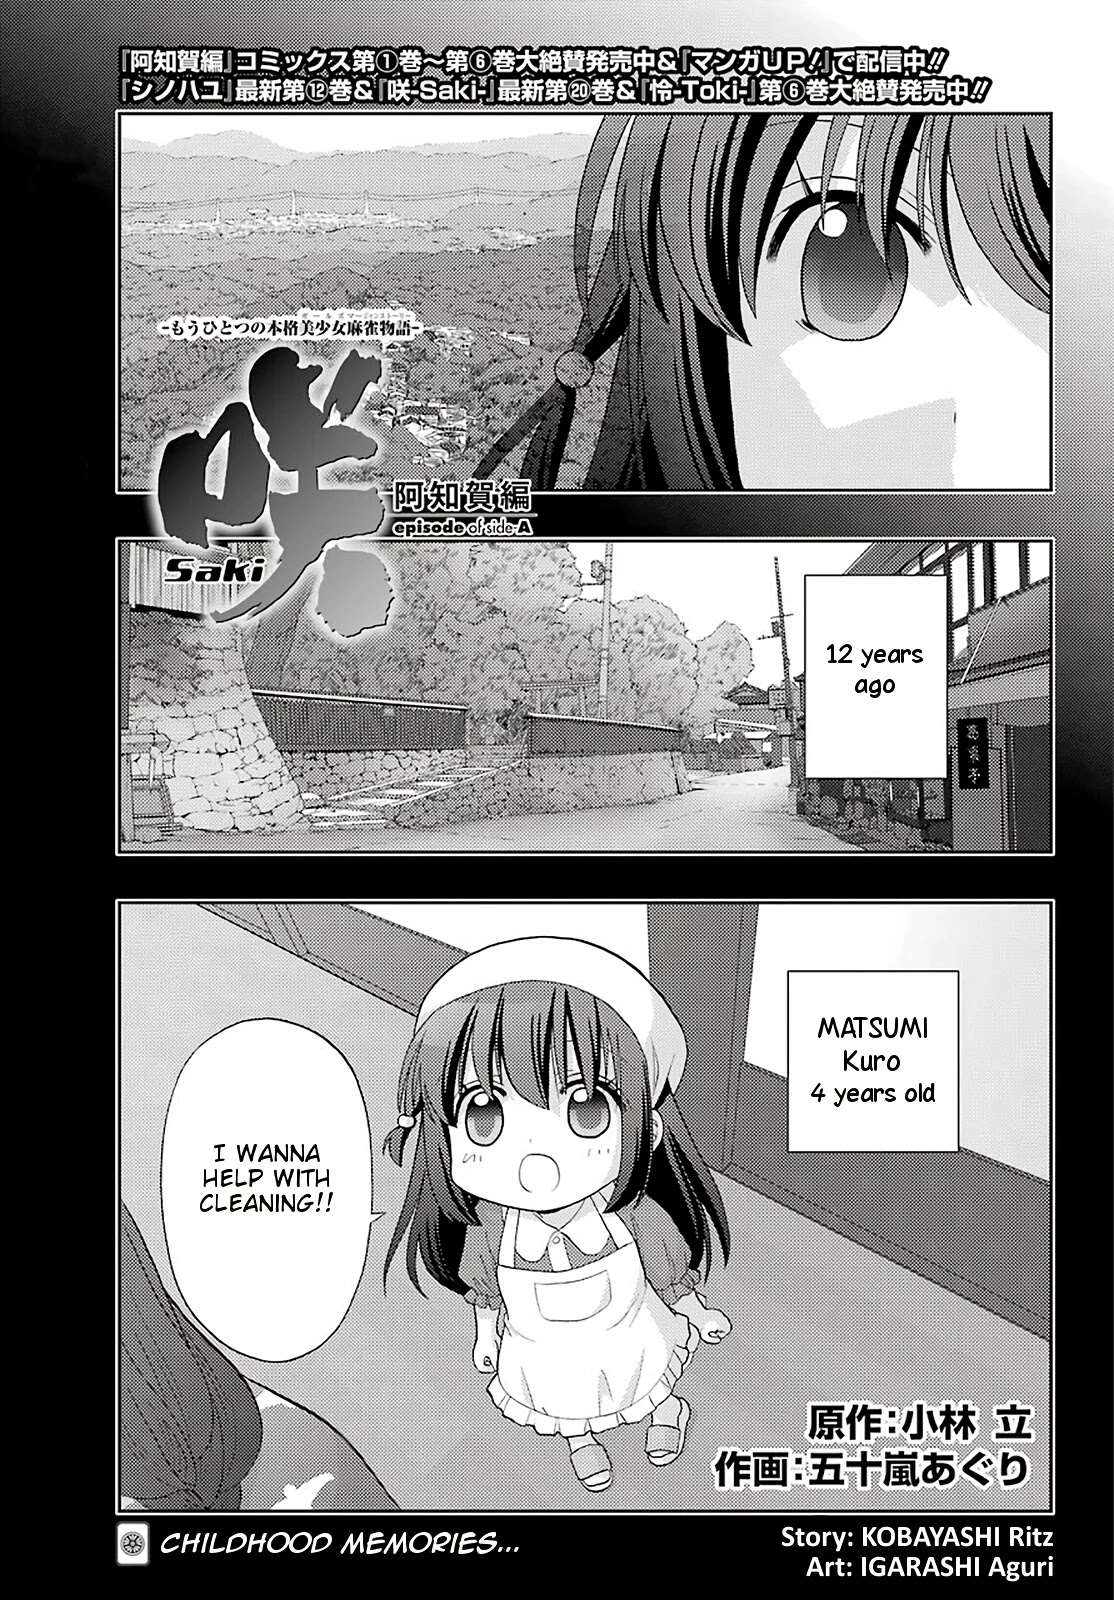 Saki: Achiga-Hen - Episode Of Side-A - New Series Chapter 26: Mother - Picture 1